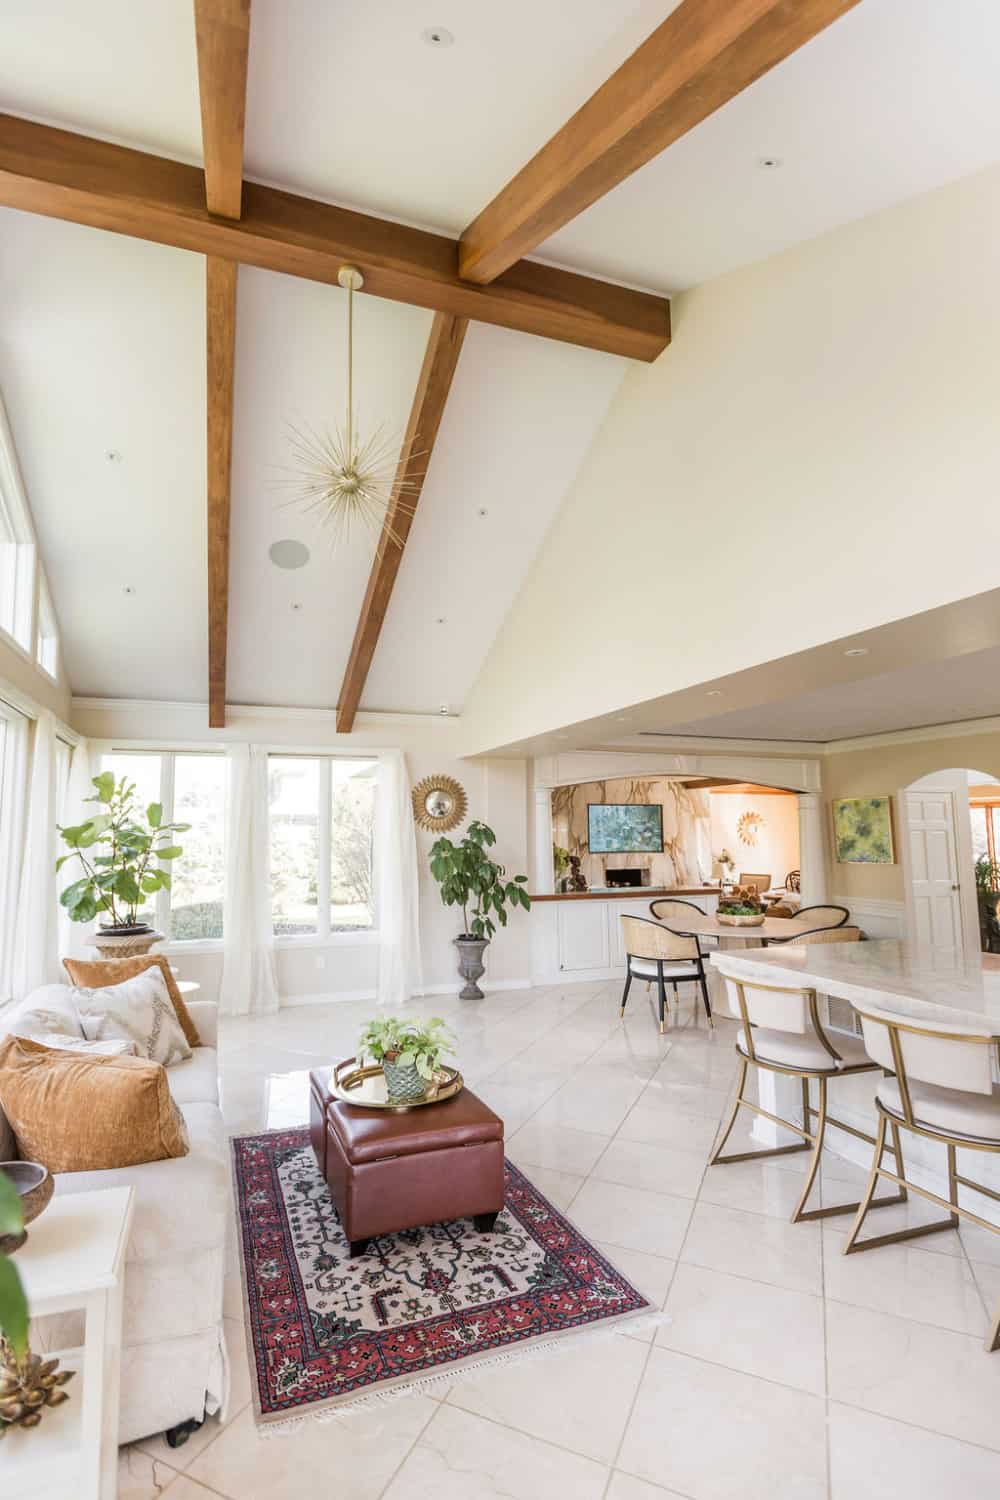 Nicholas Design Build | A large living room with wooden beams and white furniture, perfect for a remodel.